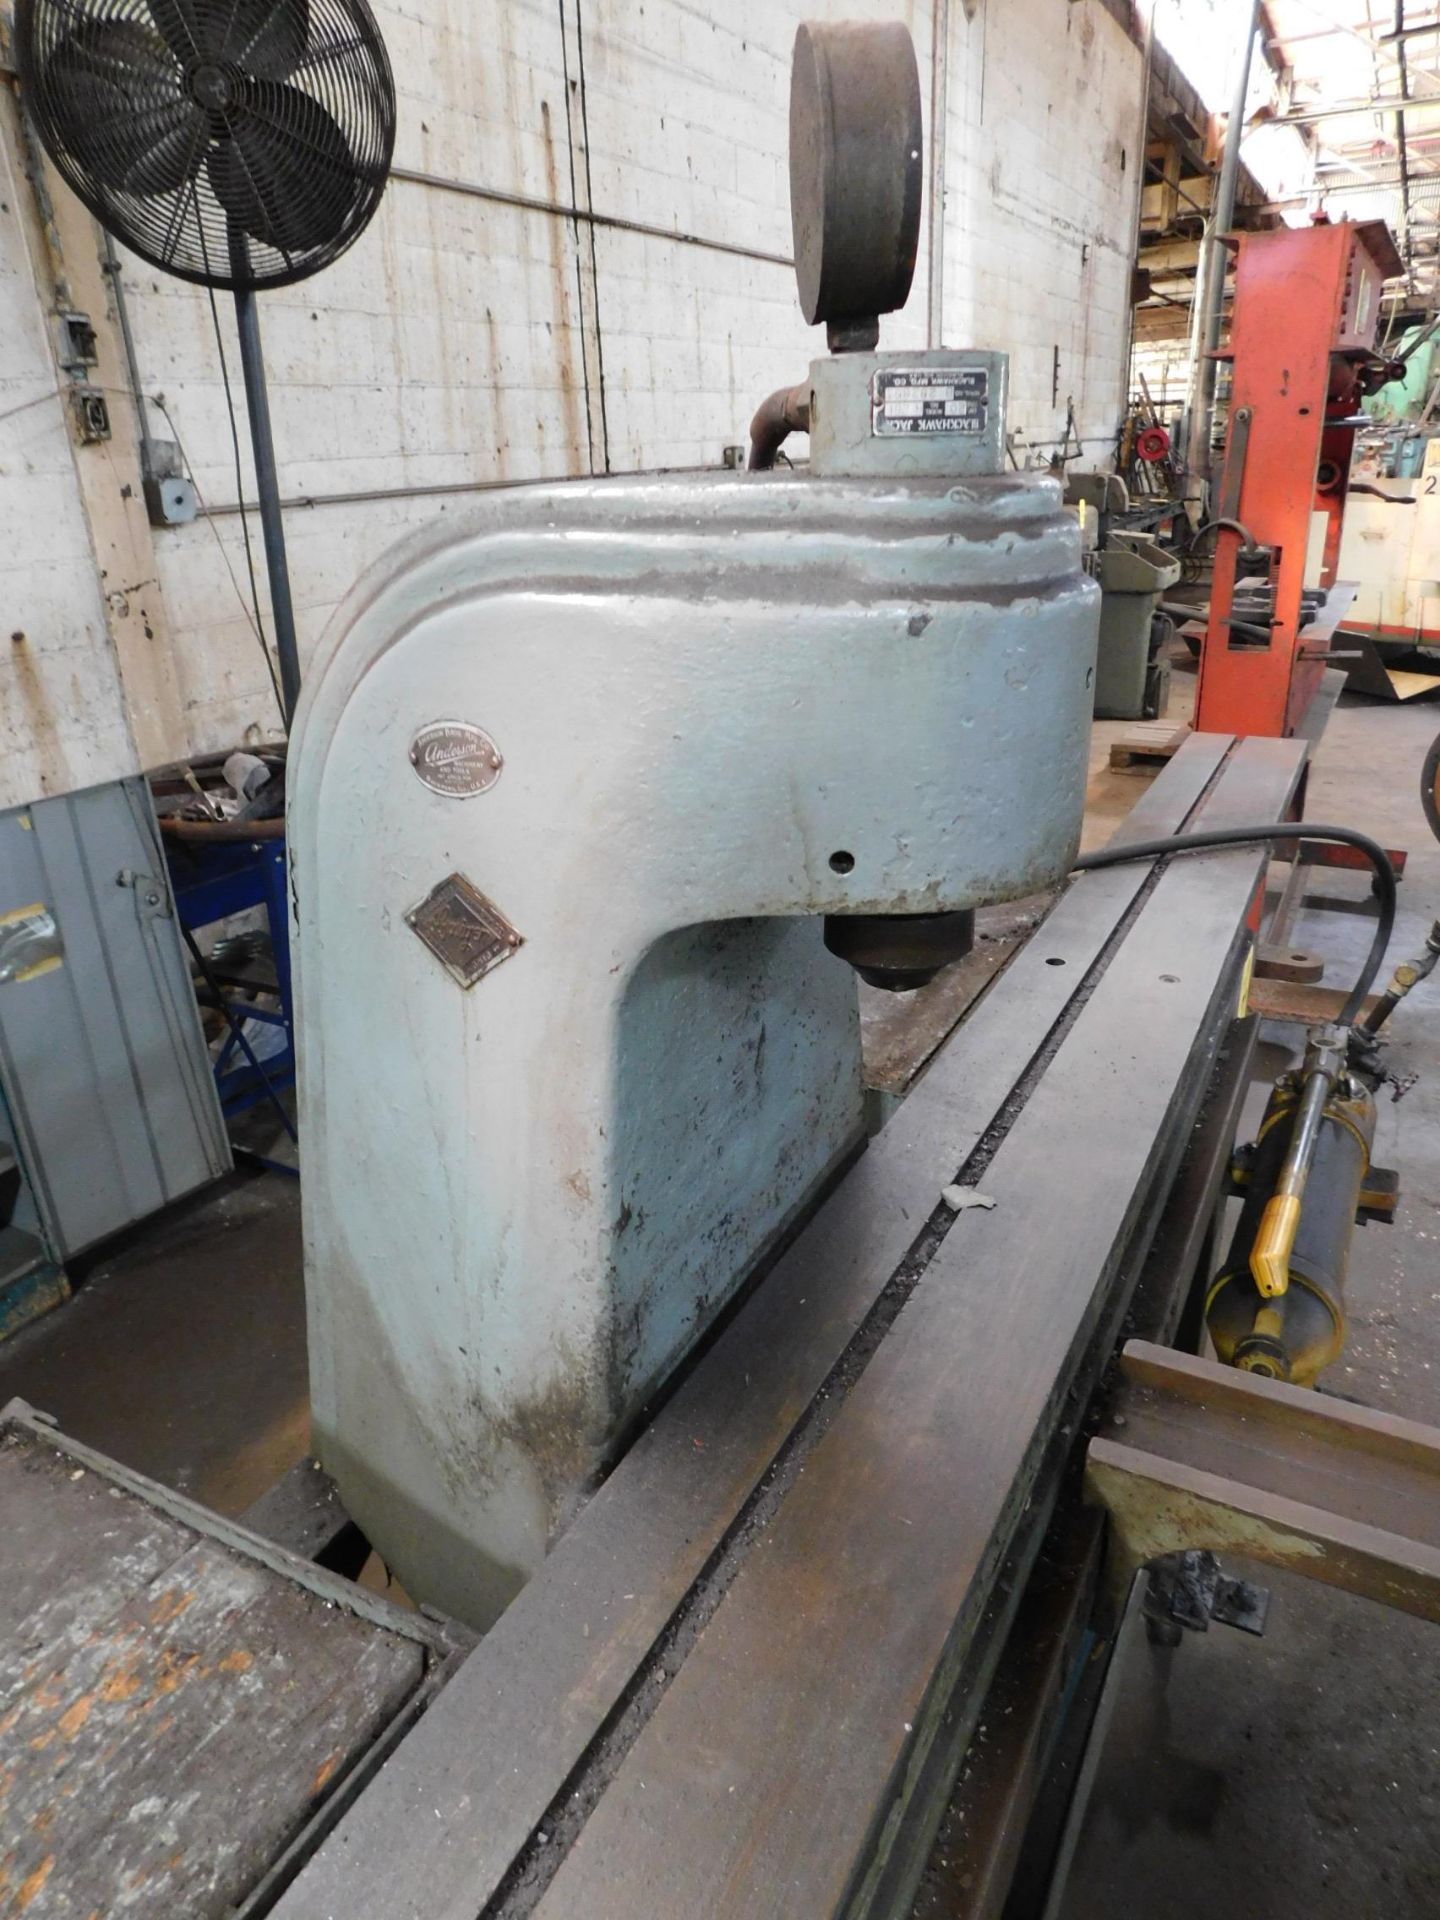 Anderson Hand Operated Hydraulic Straightening Press, Estimated 20 Ton, 7" X 120" Table, with - Image 7 of 10